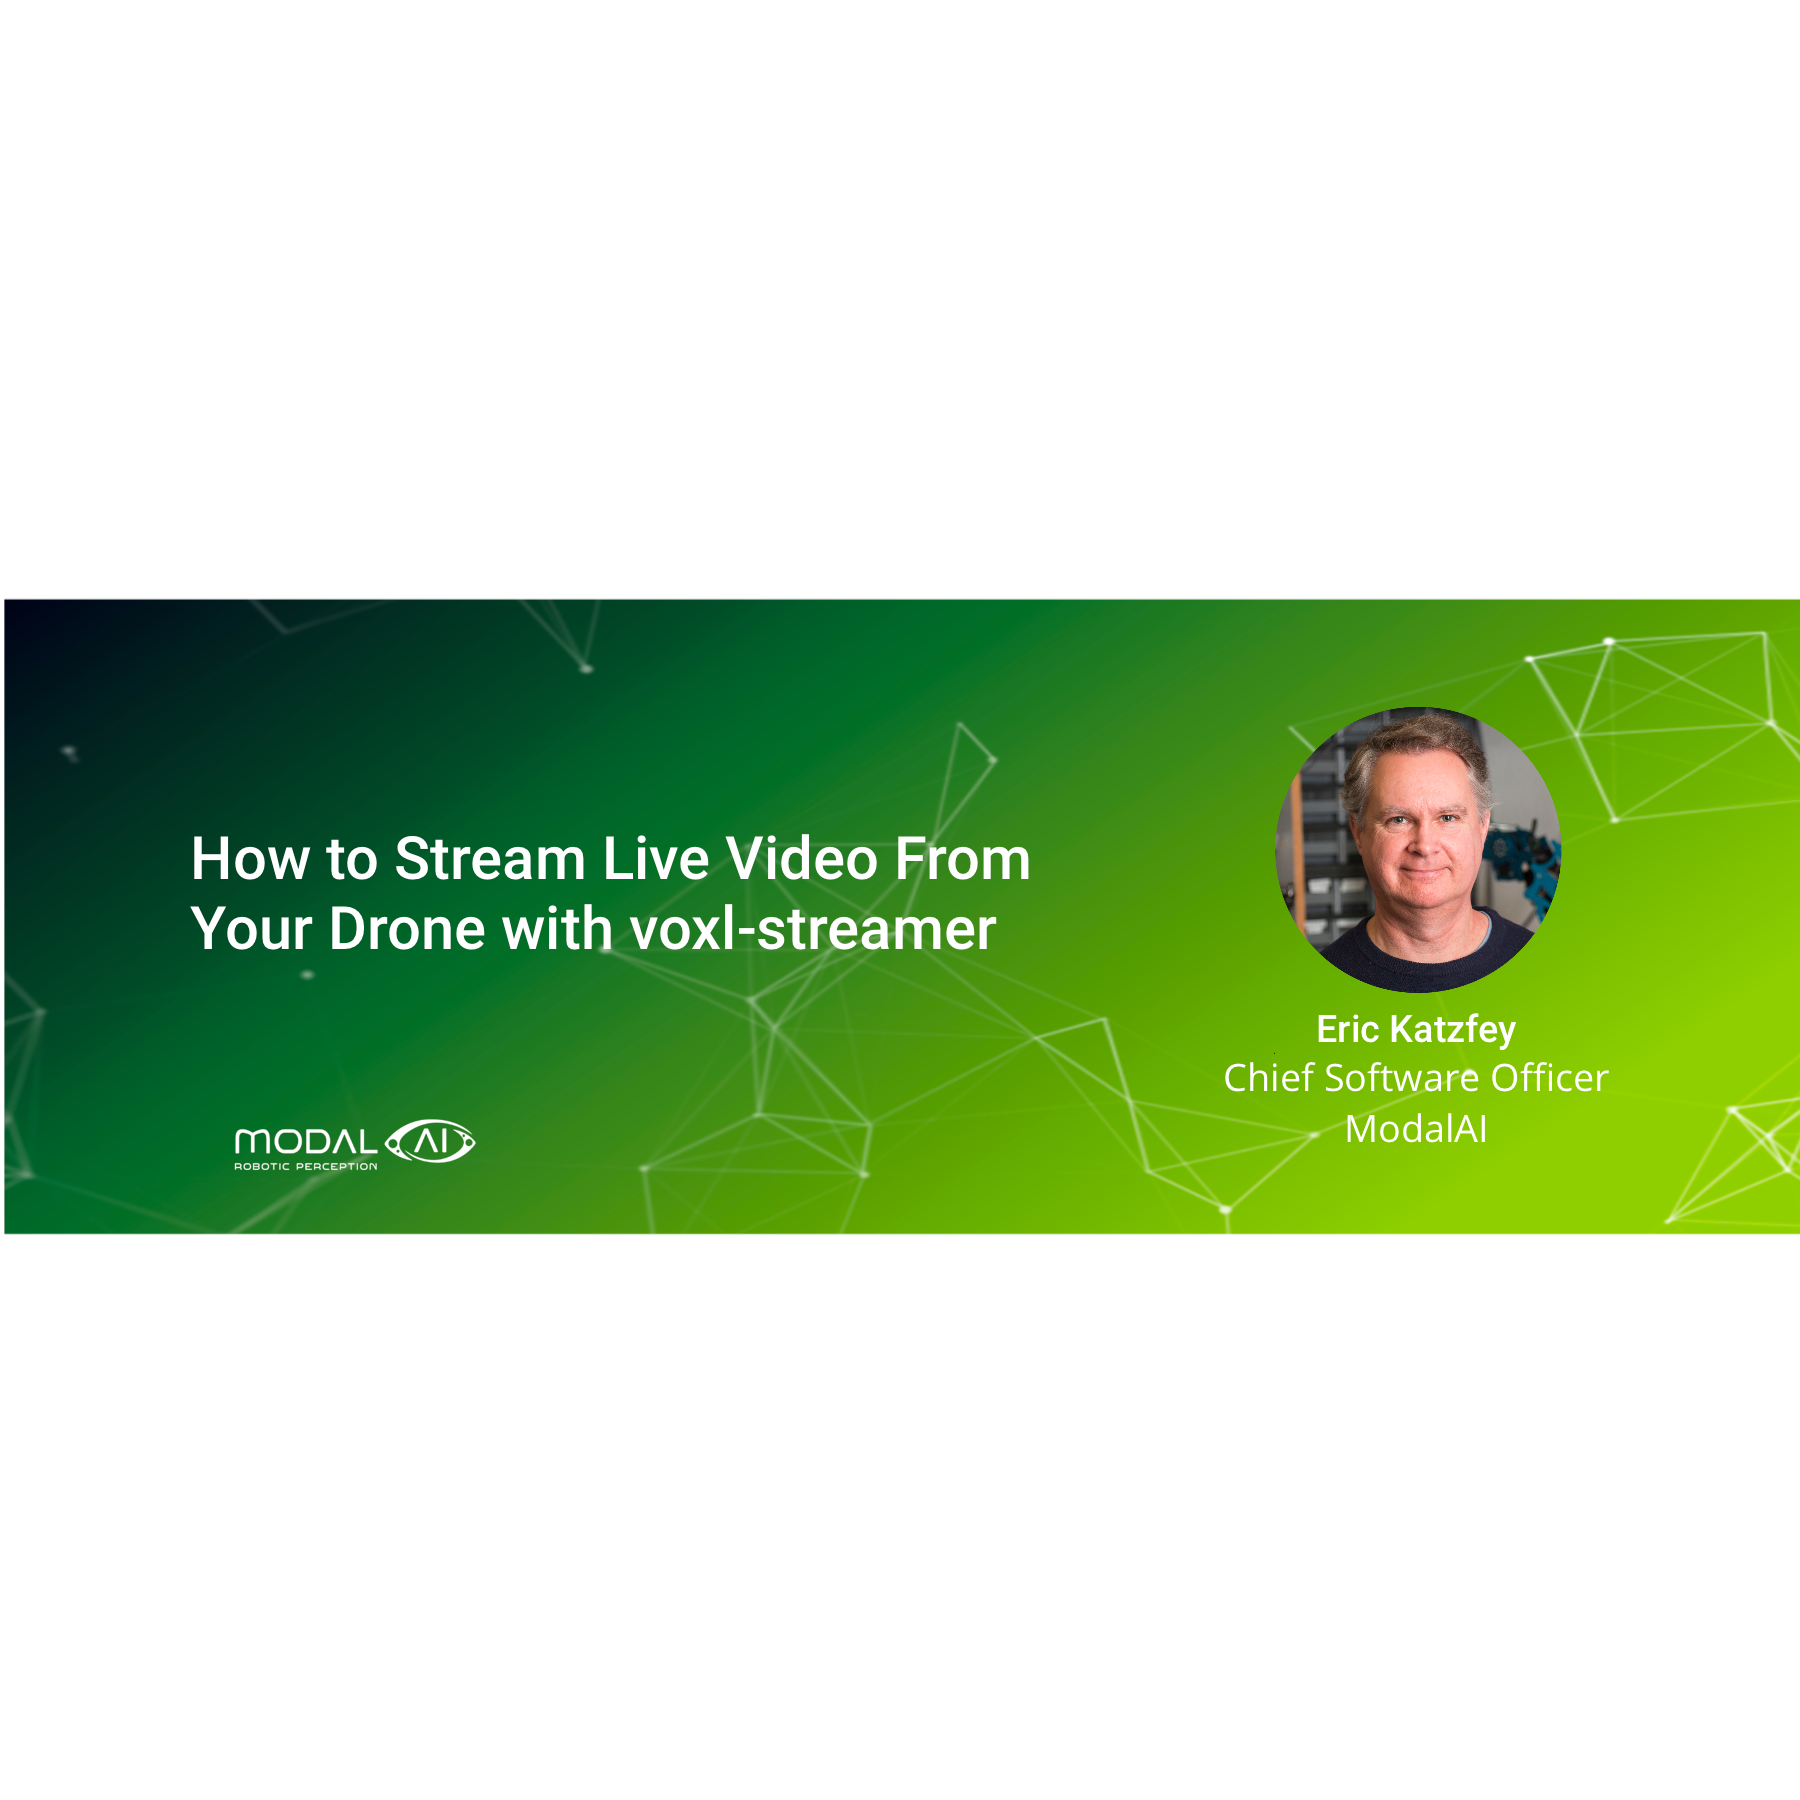 How to Stream Live Video From Your Drone with voxl-streamer